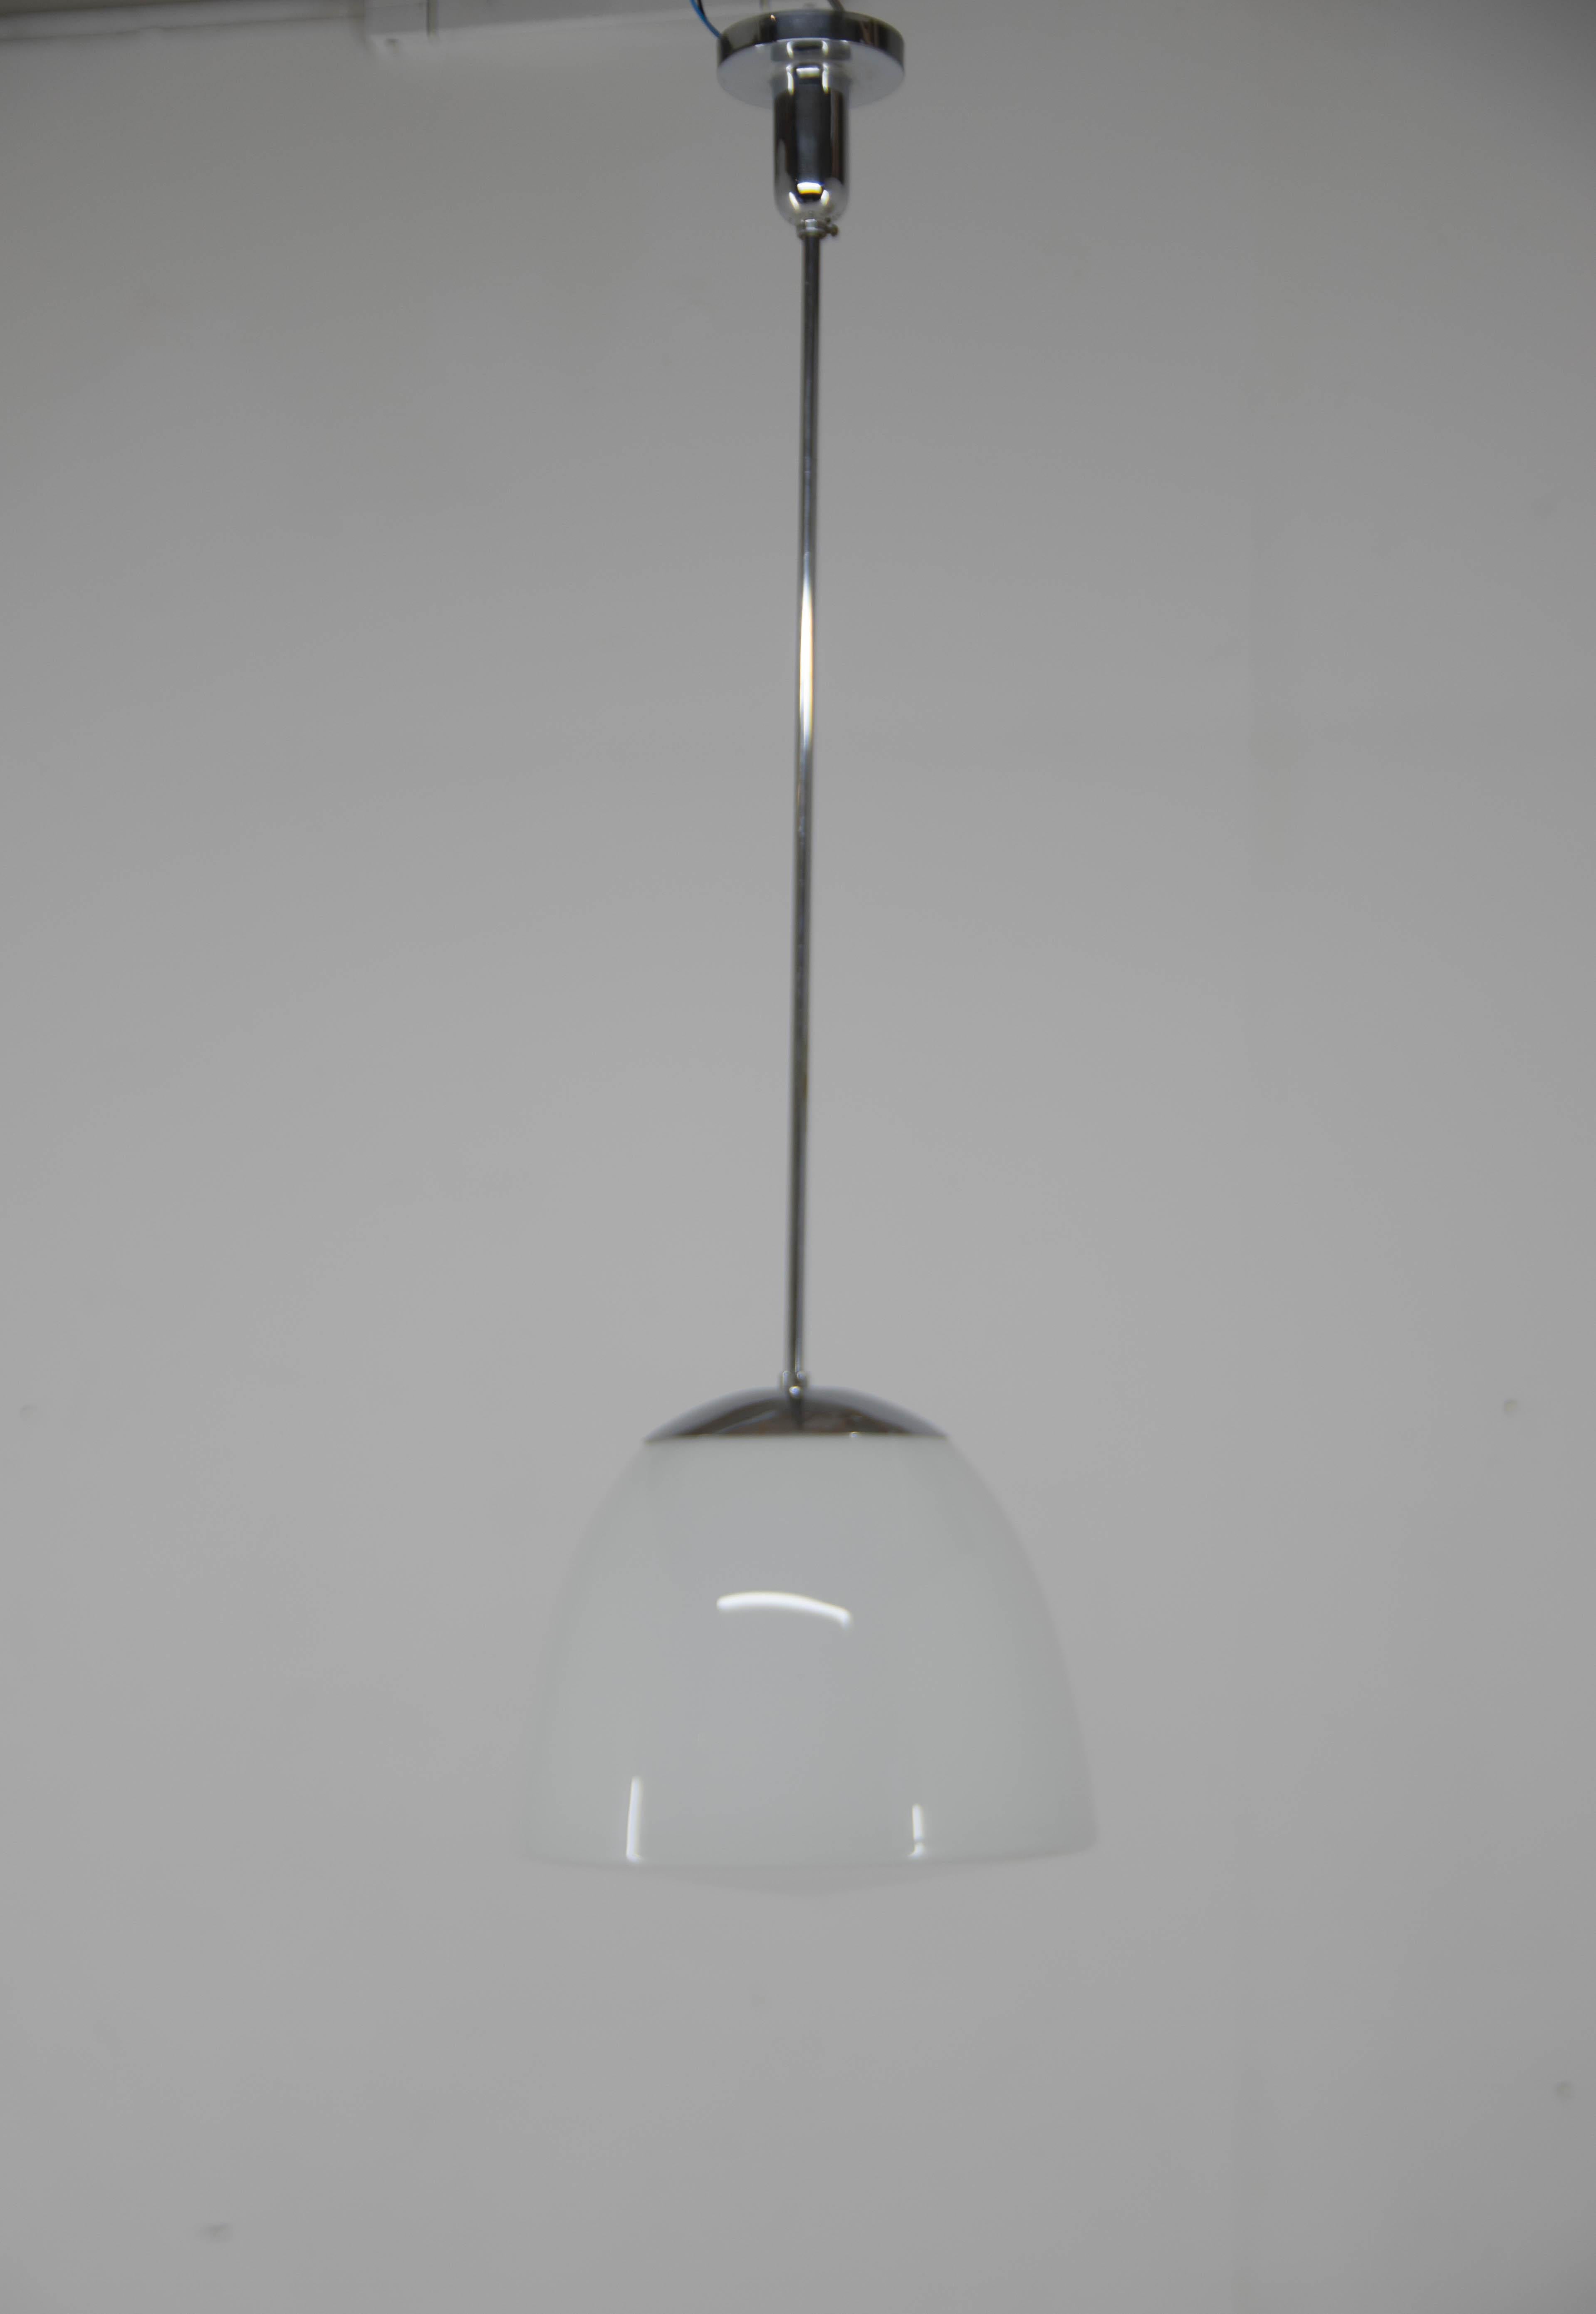 Beautiful simple elegant Bauhaus pendant made by IAS in Czechoslovakia.
Nickel-plated rod can be shorten on request.
Opaline glass shade is white on o top and semitransparent on a bottom part.
Nickel polished.
Rewired: 1x100W, E25-E27 bulb
US